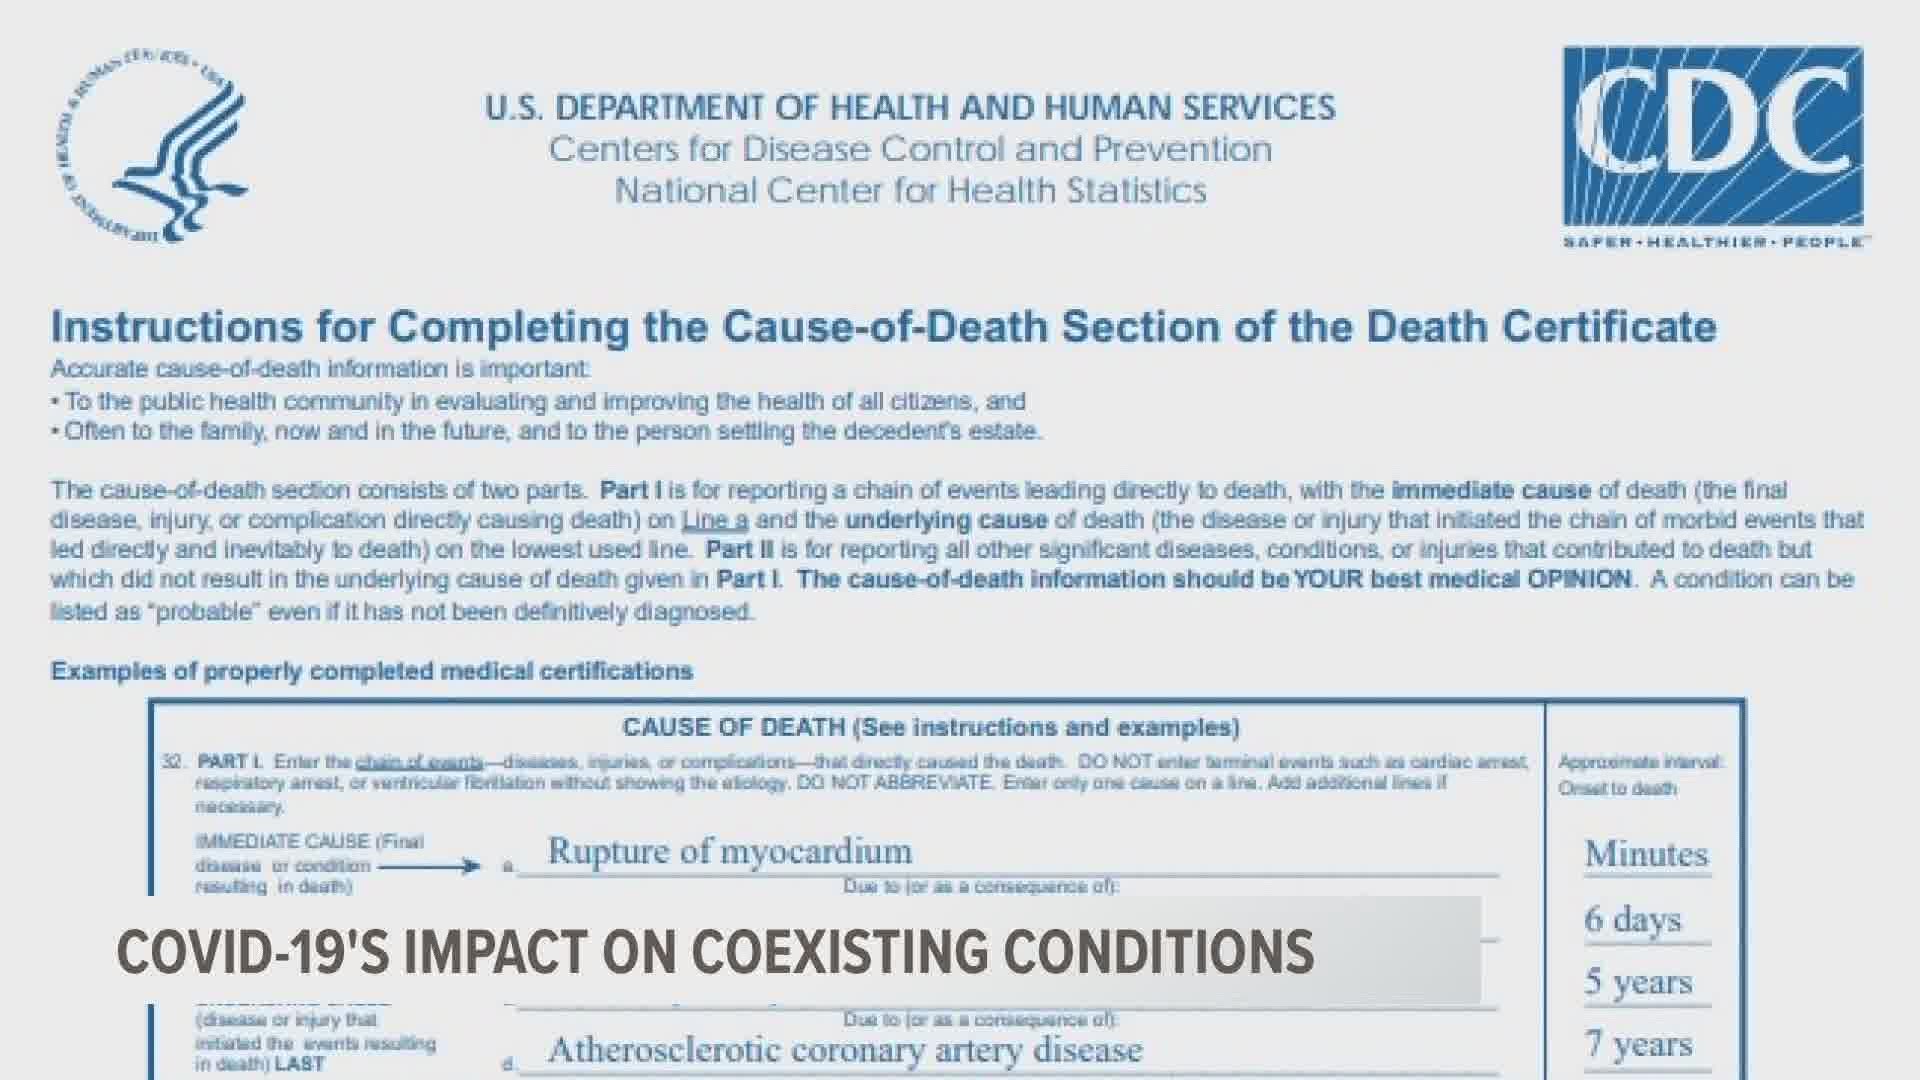 A new report shows 94% of COVID-19 victims had coexisting conditions listed on their death certificates, prompting social media doubts about the virus.